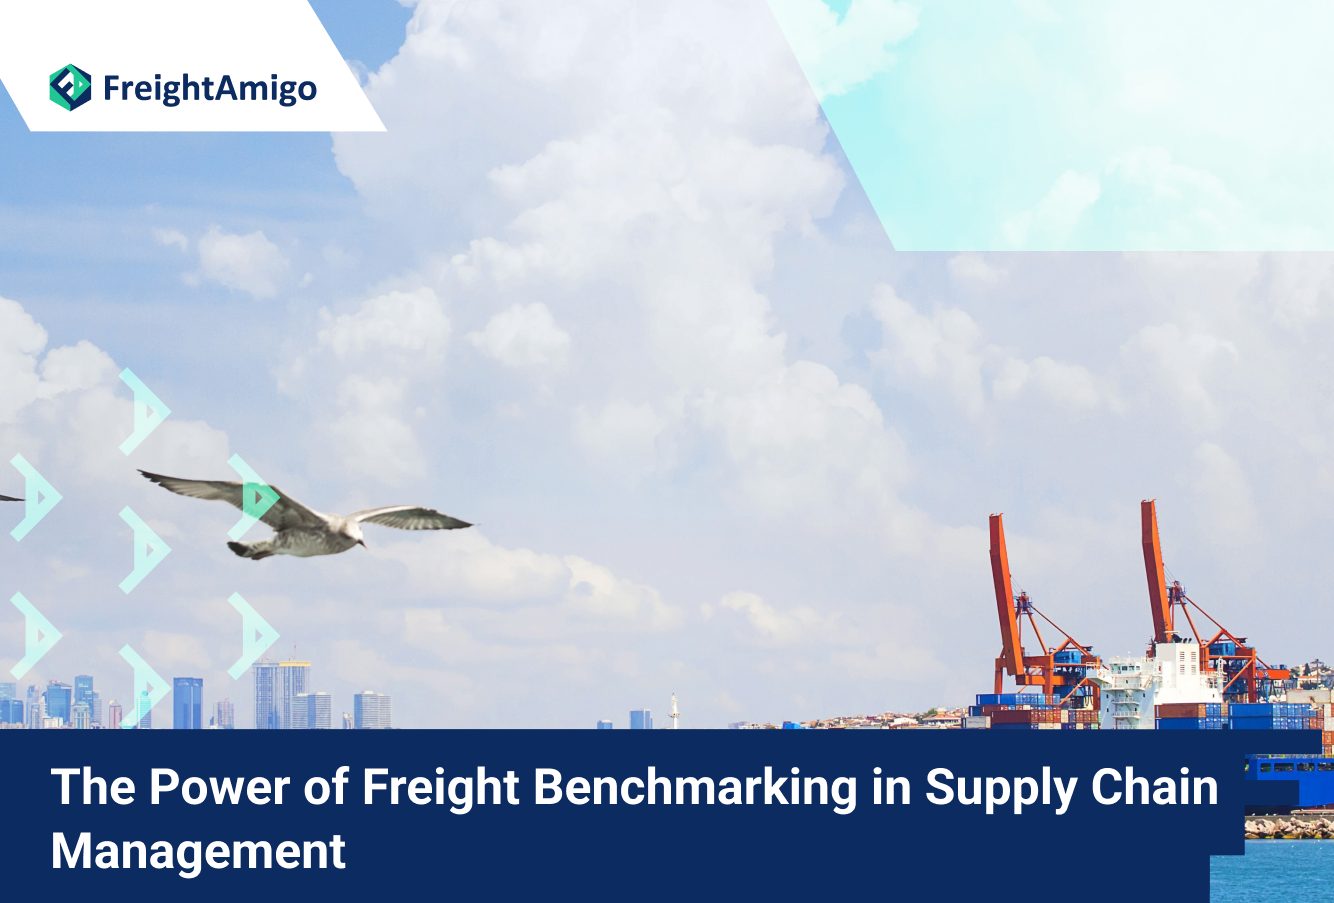 The Power of Freight Benchmarking in Supply Chain Management